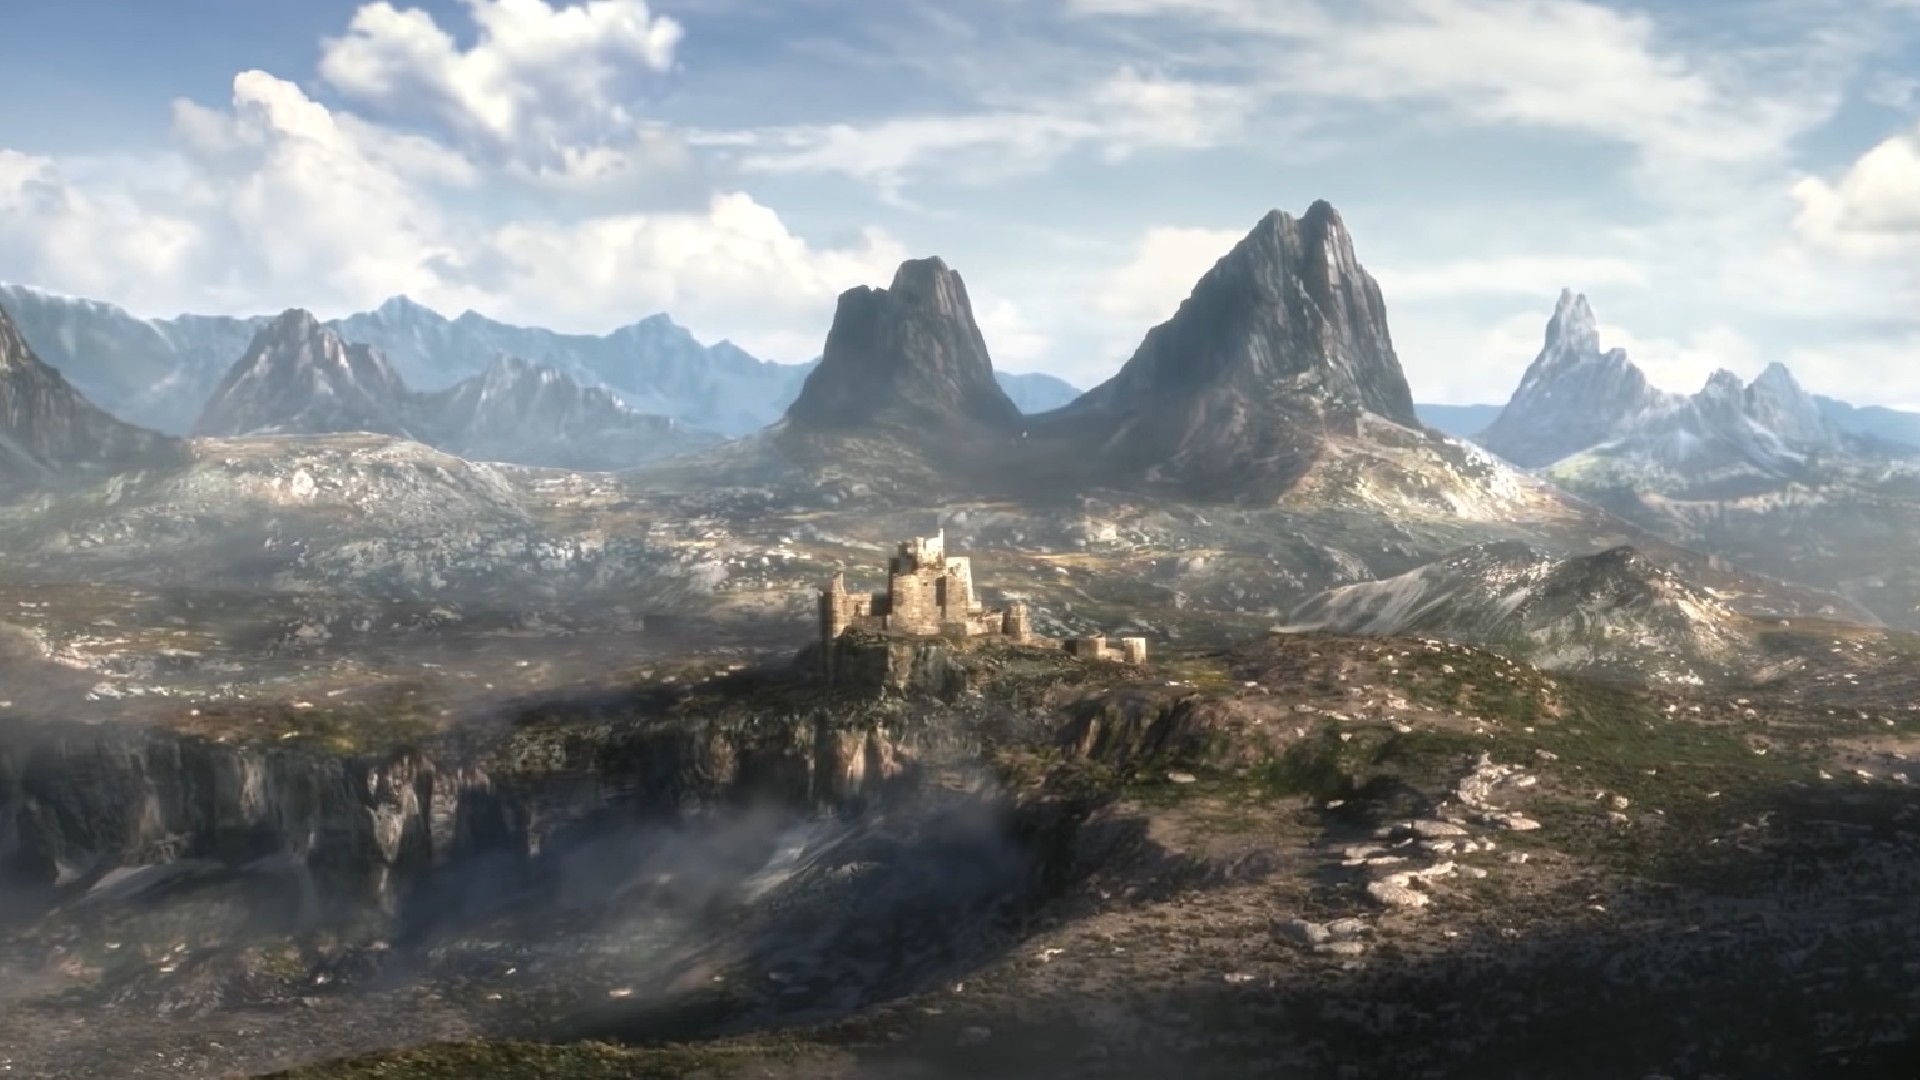 The Elder Scrolls 6 News and Details Are Still Years Away